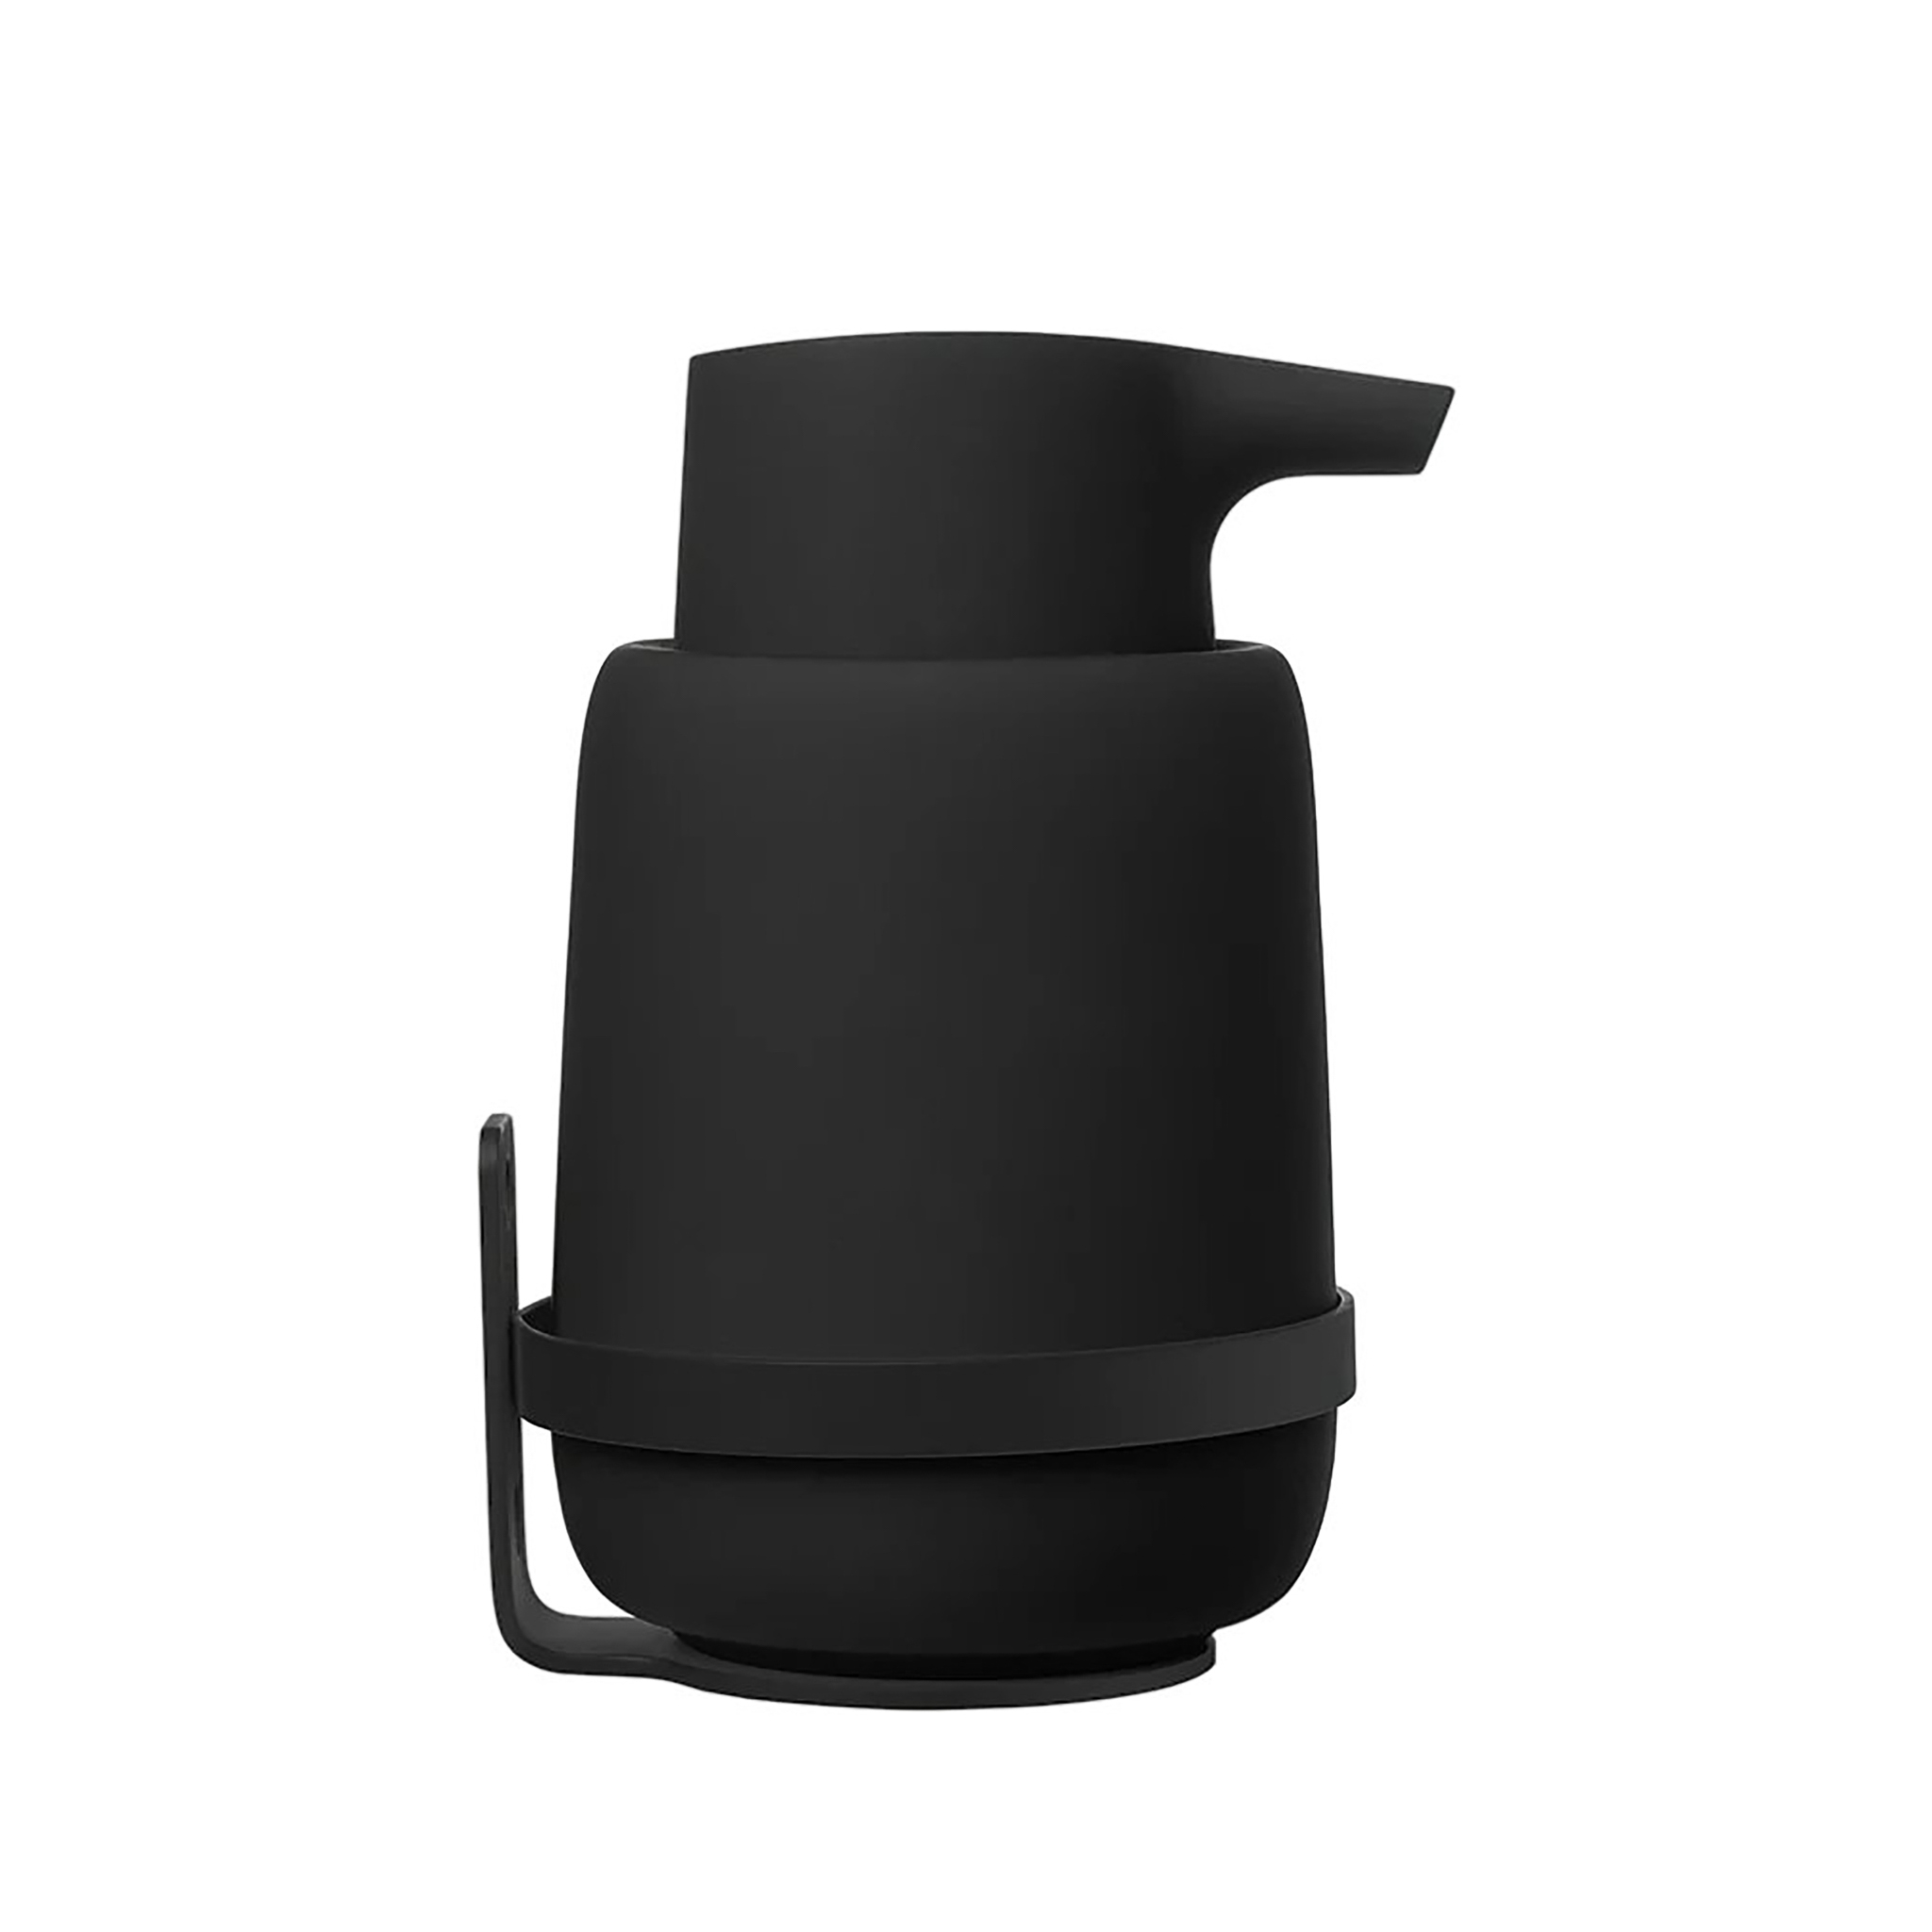 BLOMUS // SONO - WALL MOUNT | FOR SOAP DISPENSER & TOOTHBRUSH CUP | BLACK